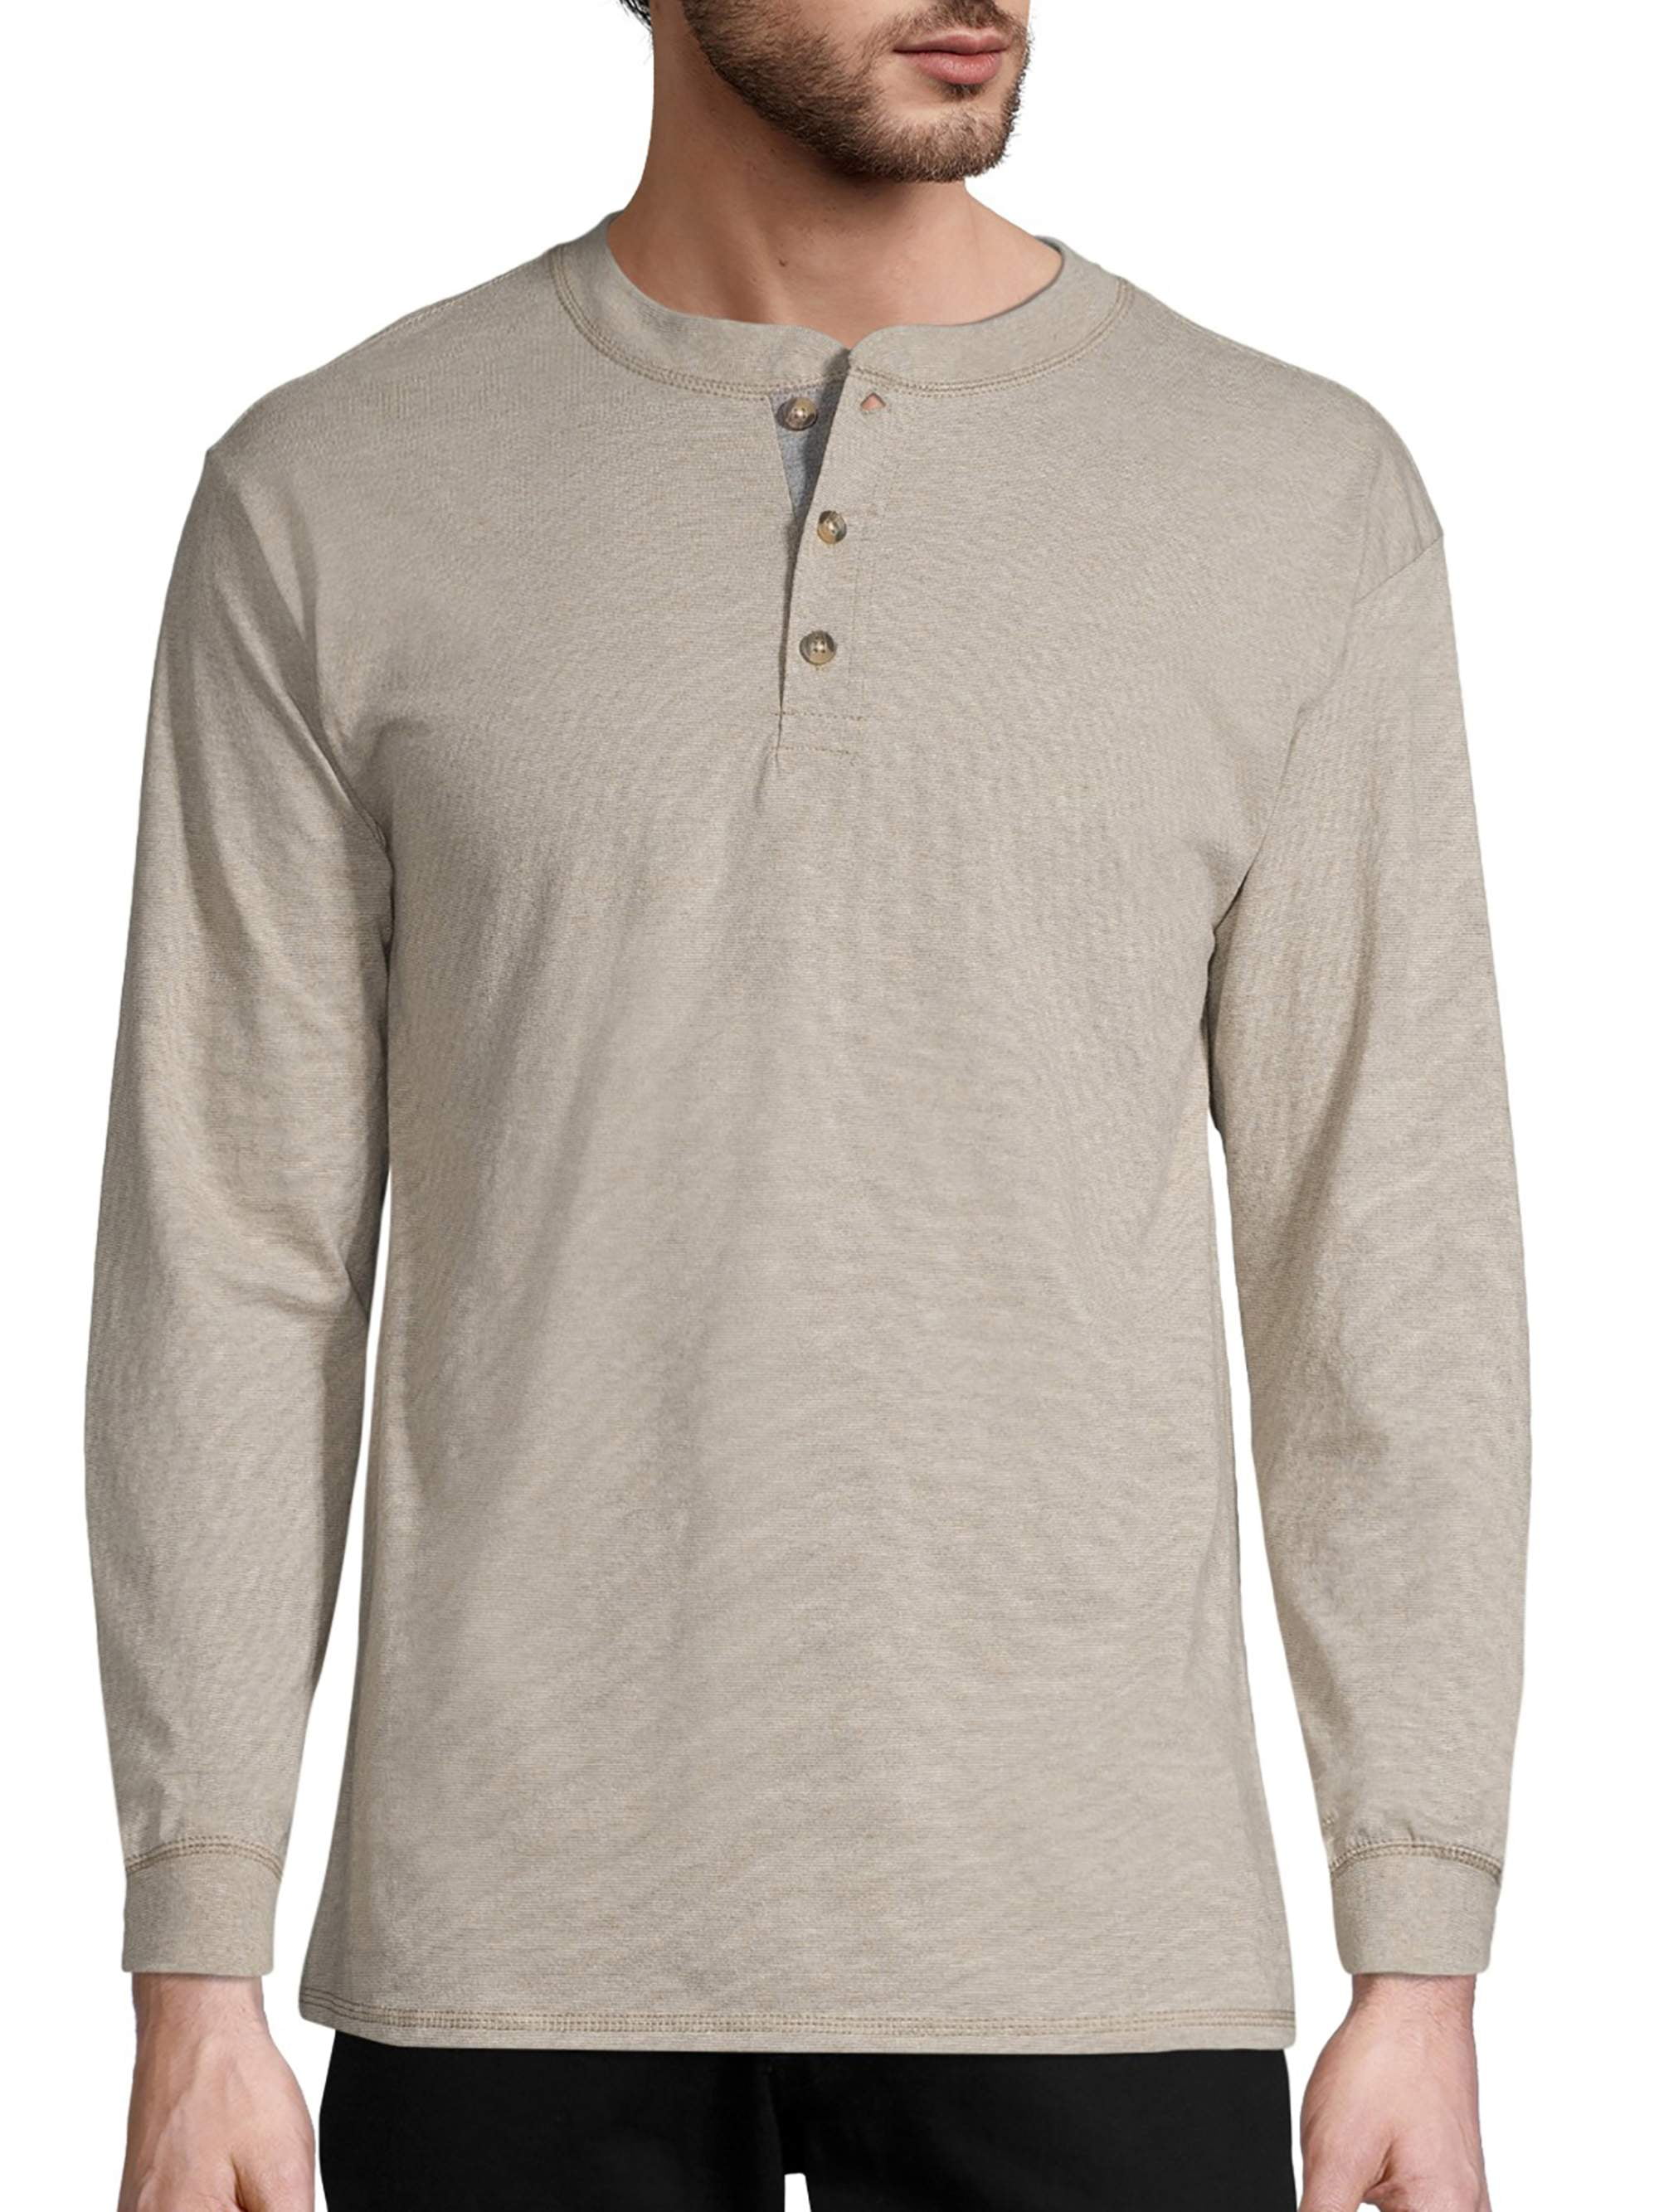 French Connection Mens 3 Button Solid Color Henley Shirt 